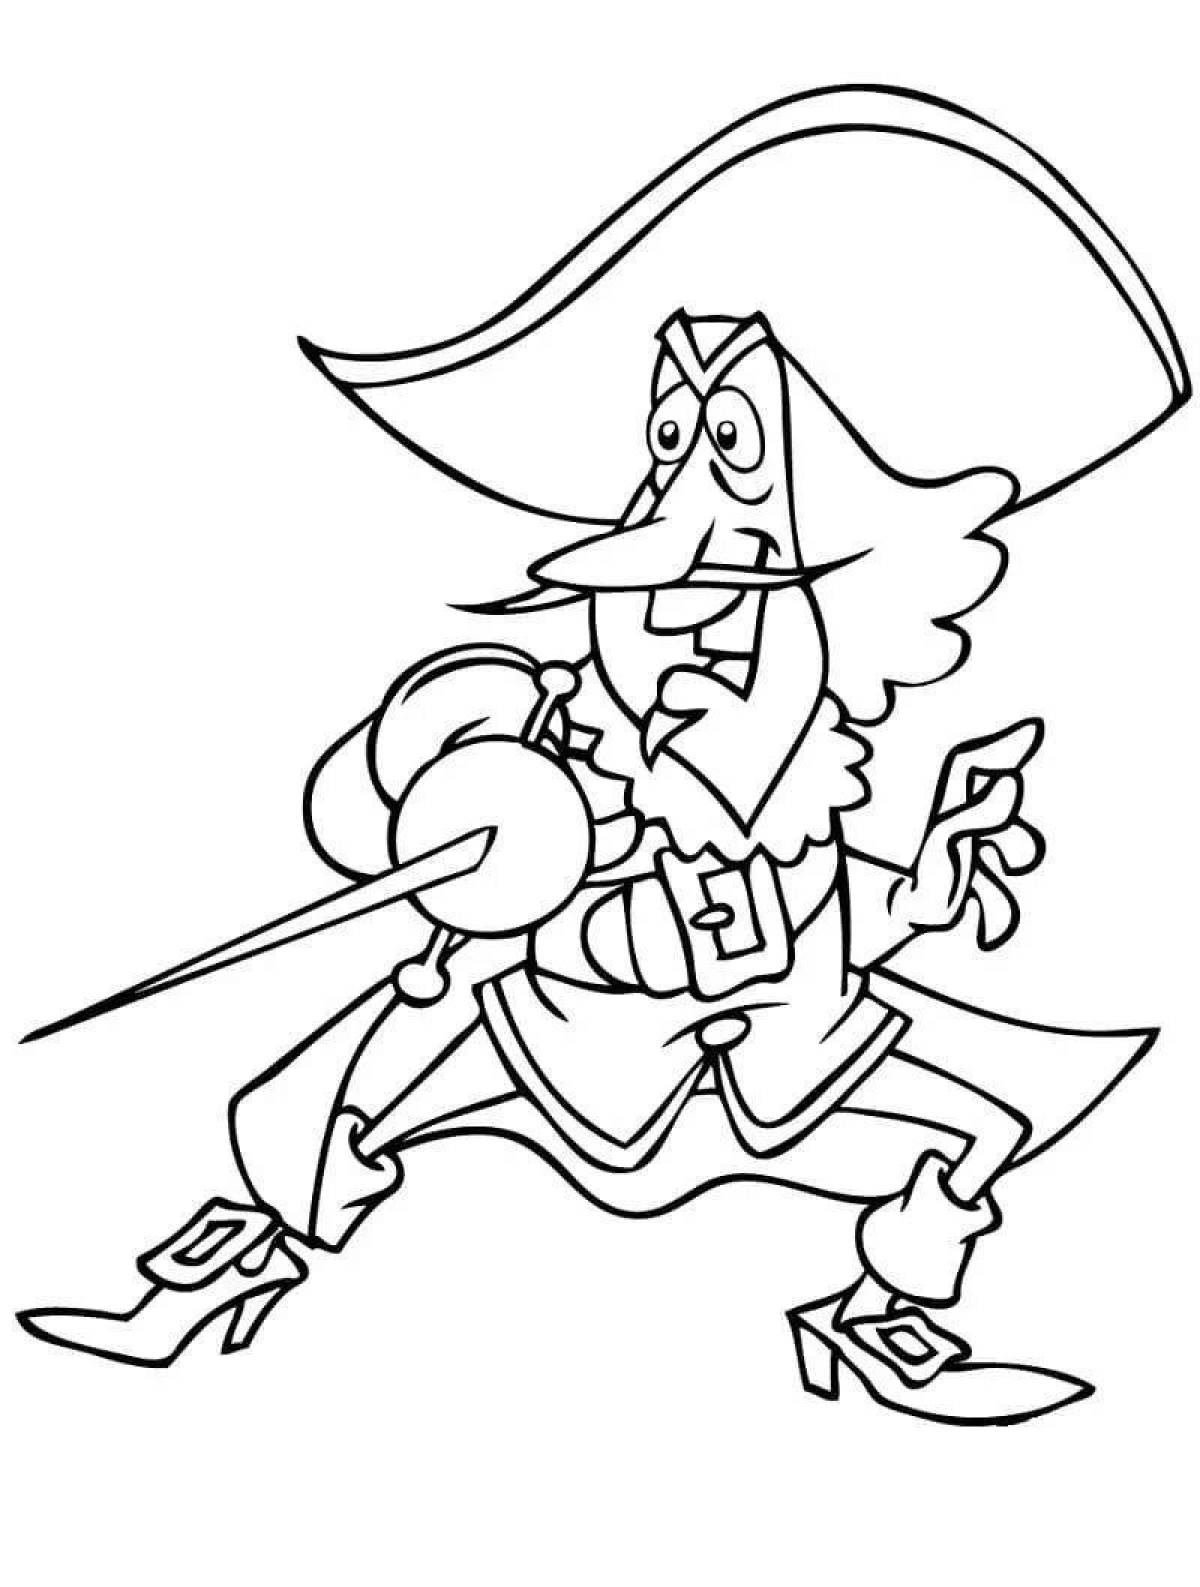 Coloring page fascinating musketeers